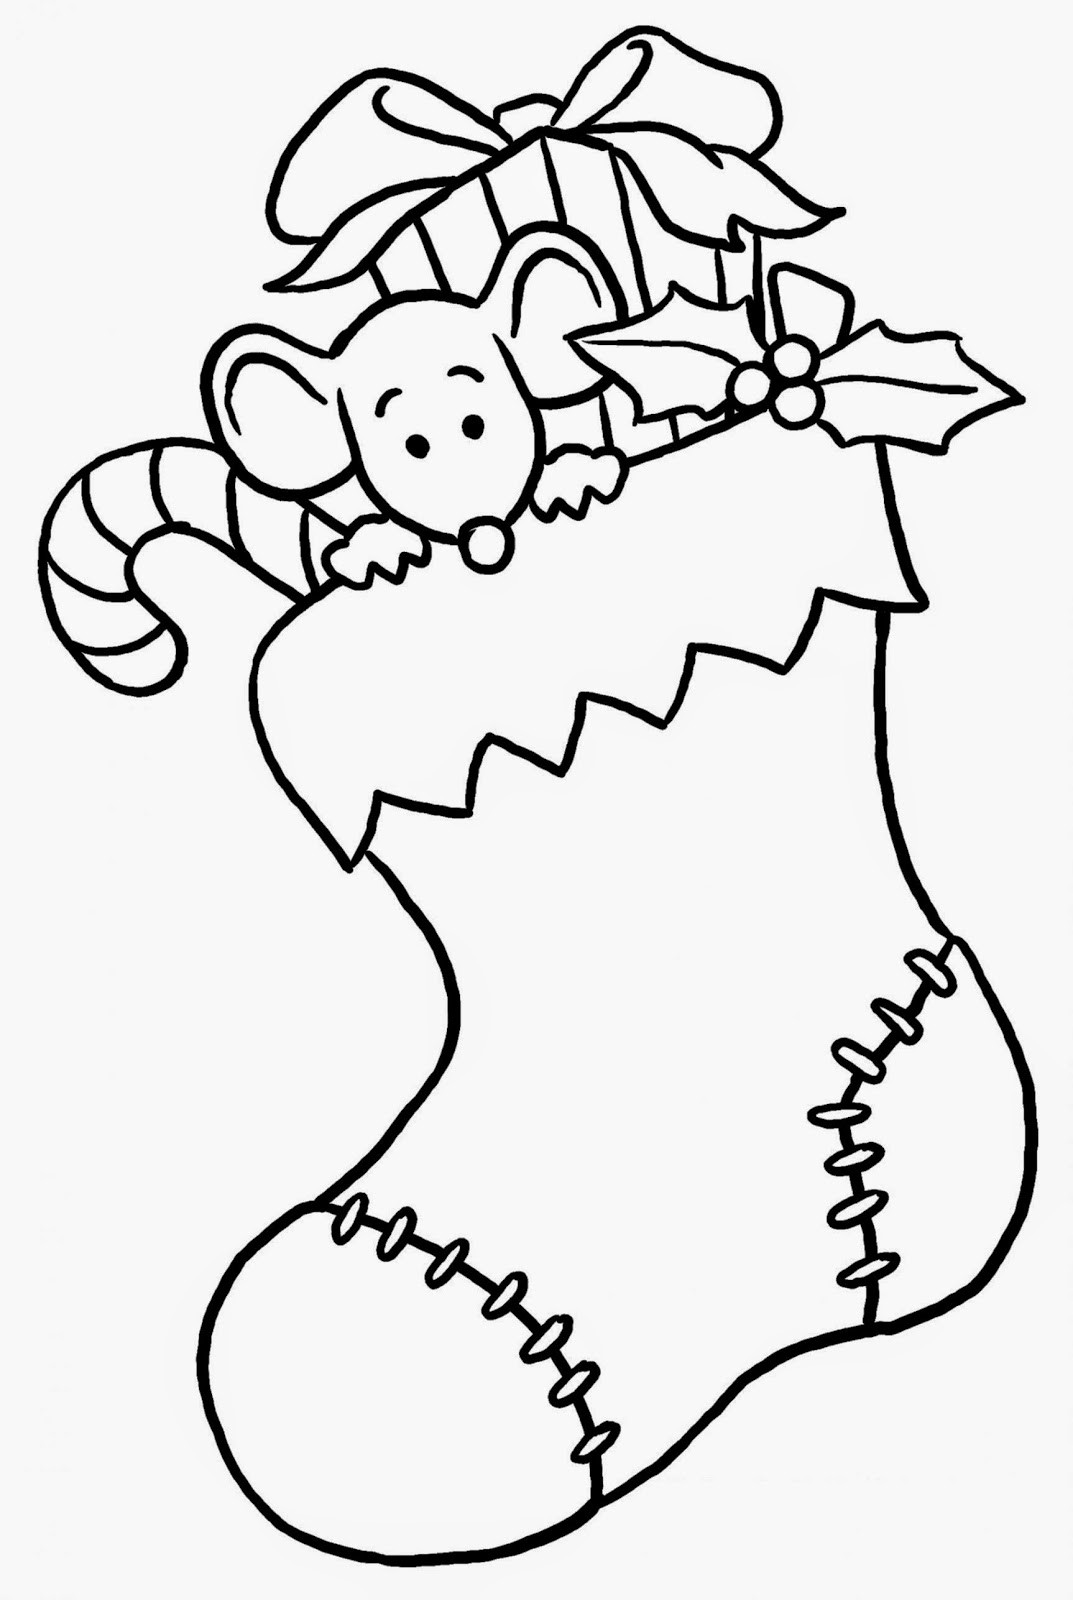 Toddler Christmas Coloring Pages Free
 Free Printable Preschool Coloring Pages Best Coloring